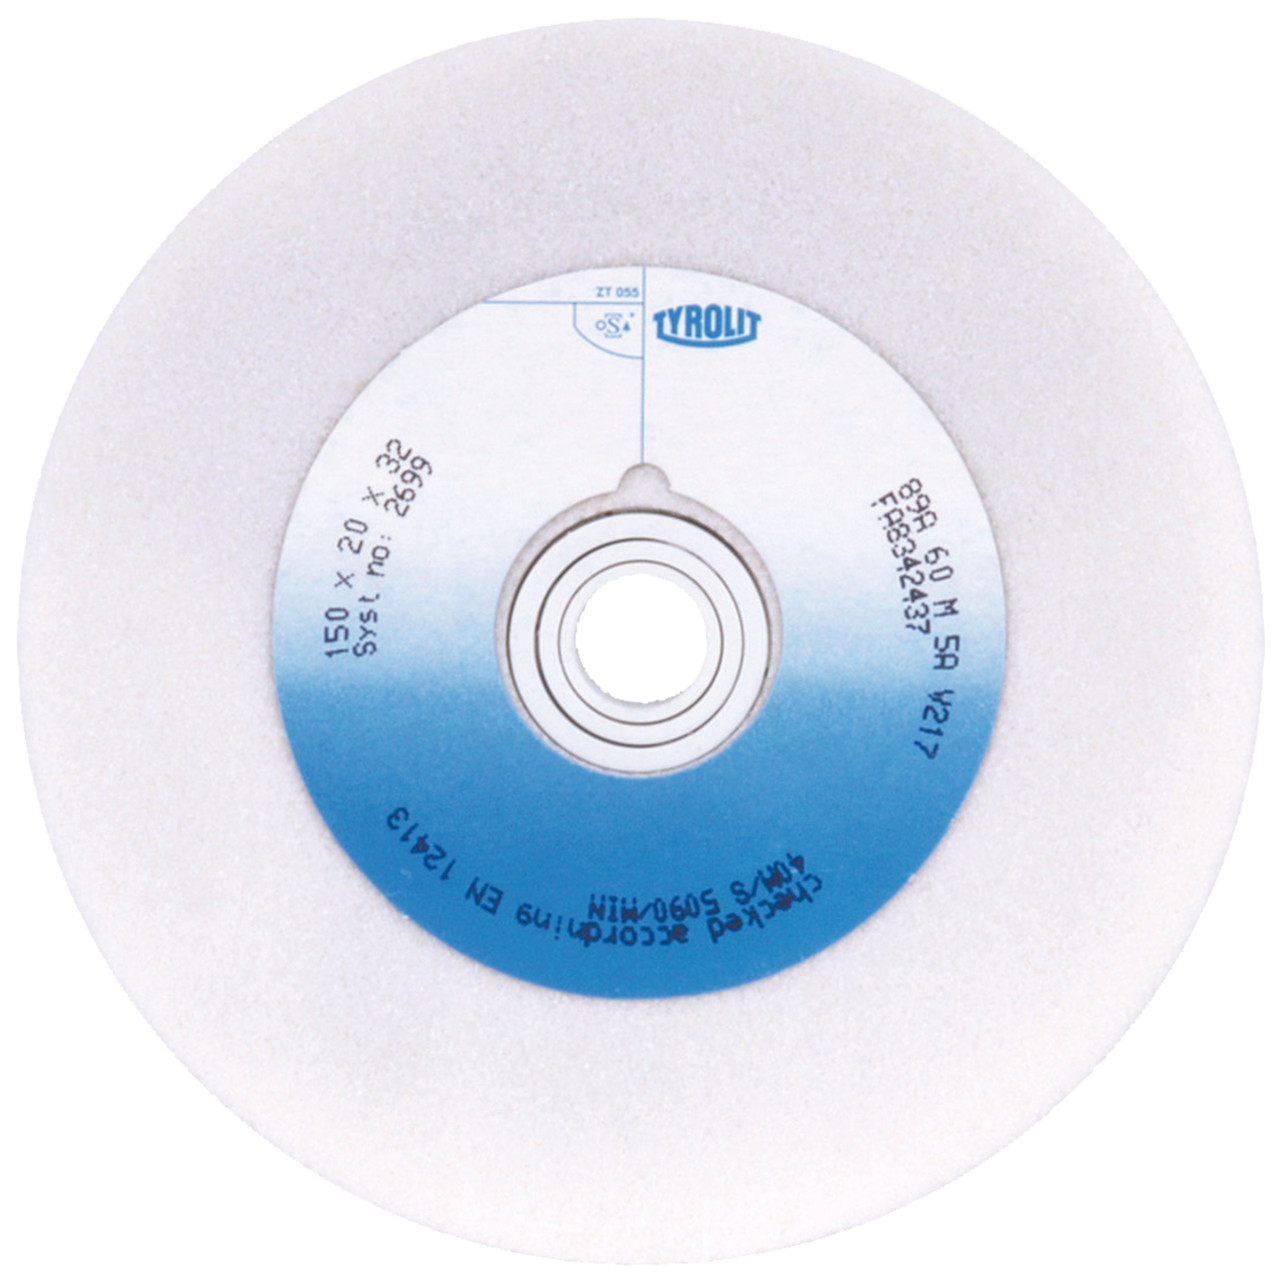 Tyrolit Conventional ceramic grinding discs DxDxH 200x25x20 For high-alloy steels and HSS, shape: 1, Art. 122997